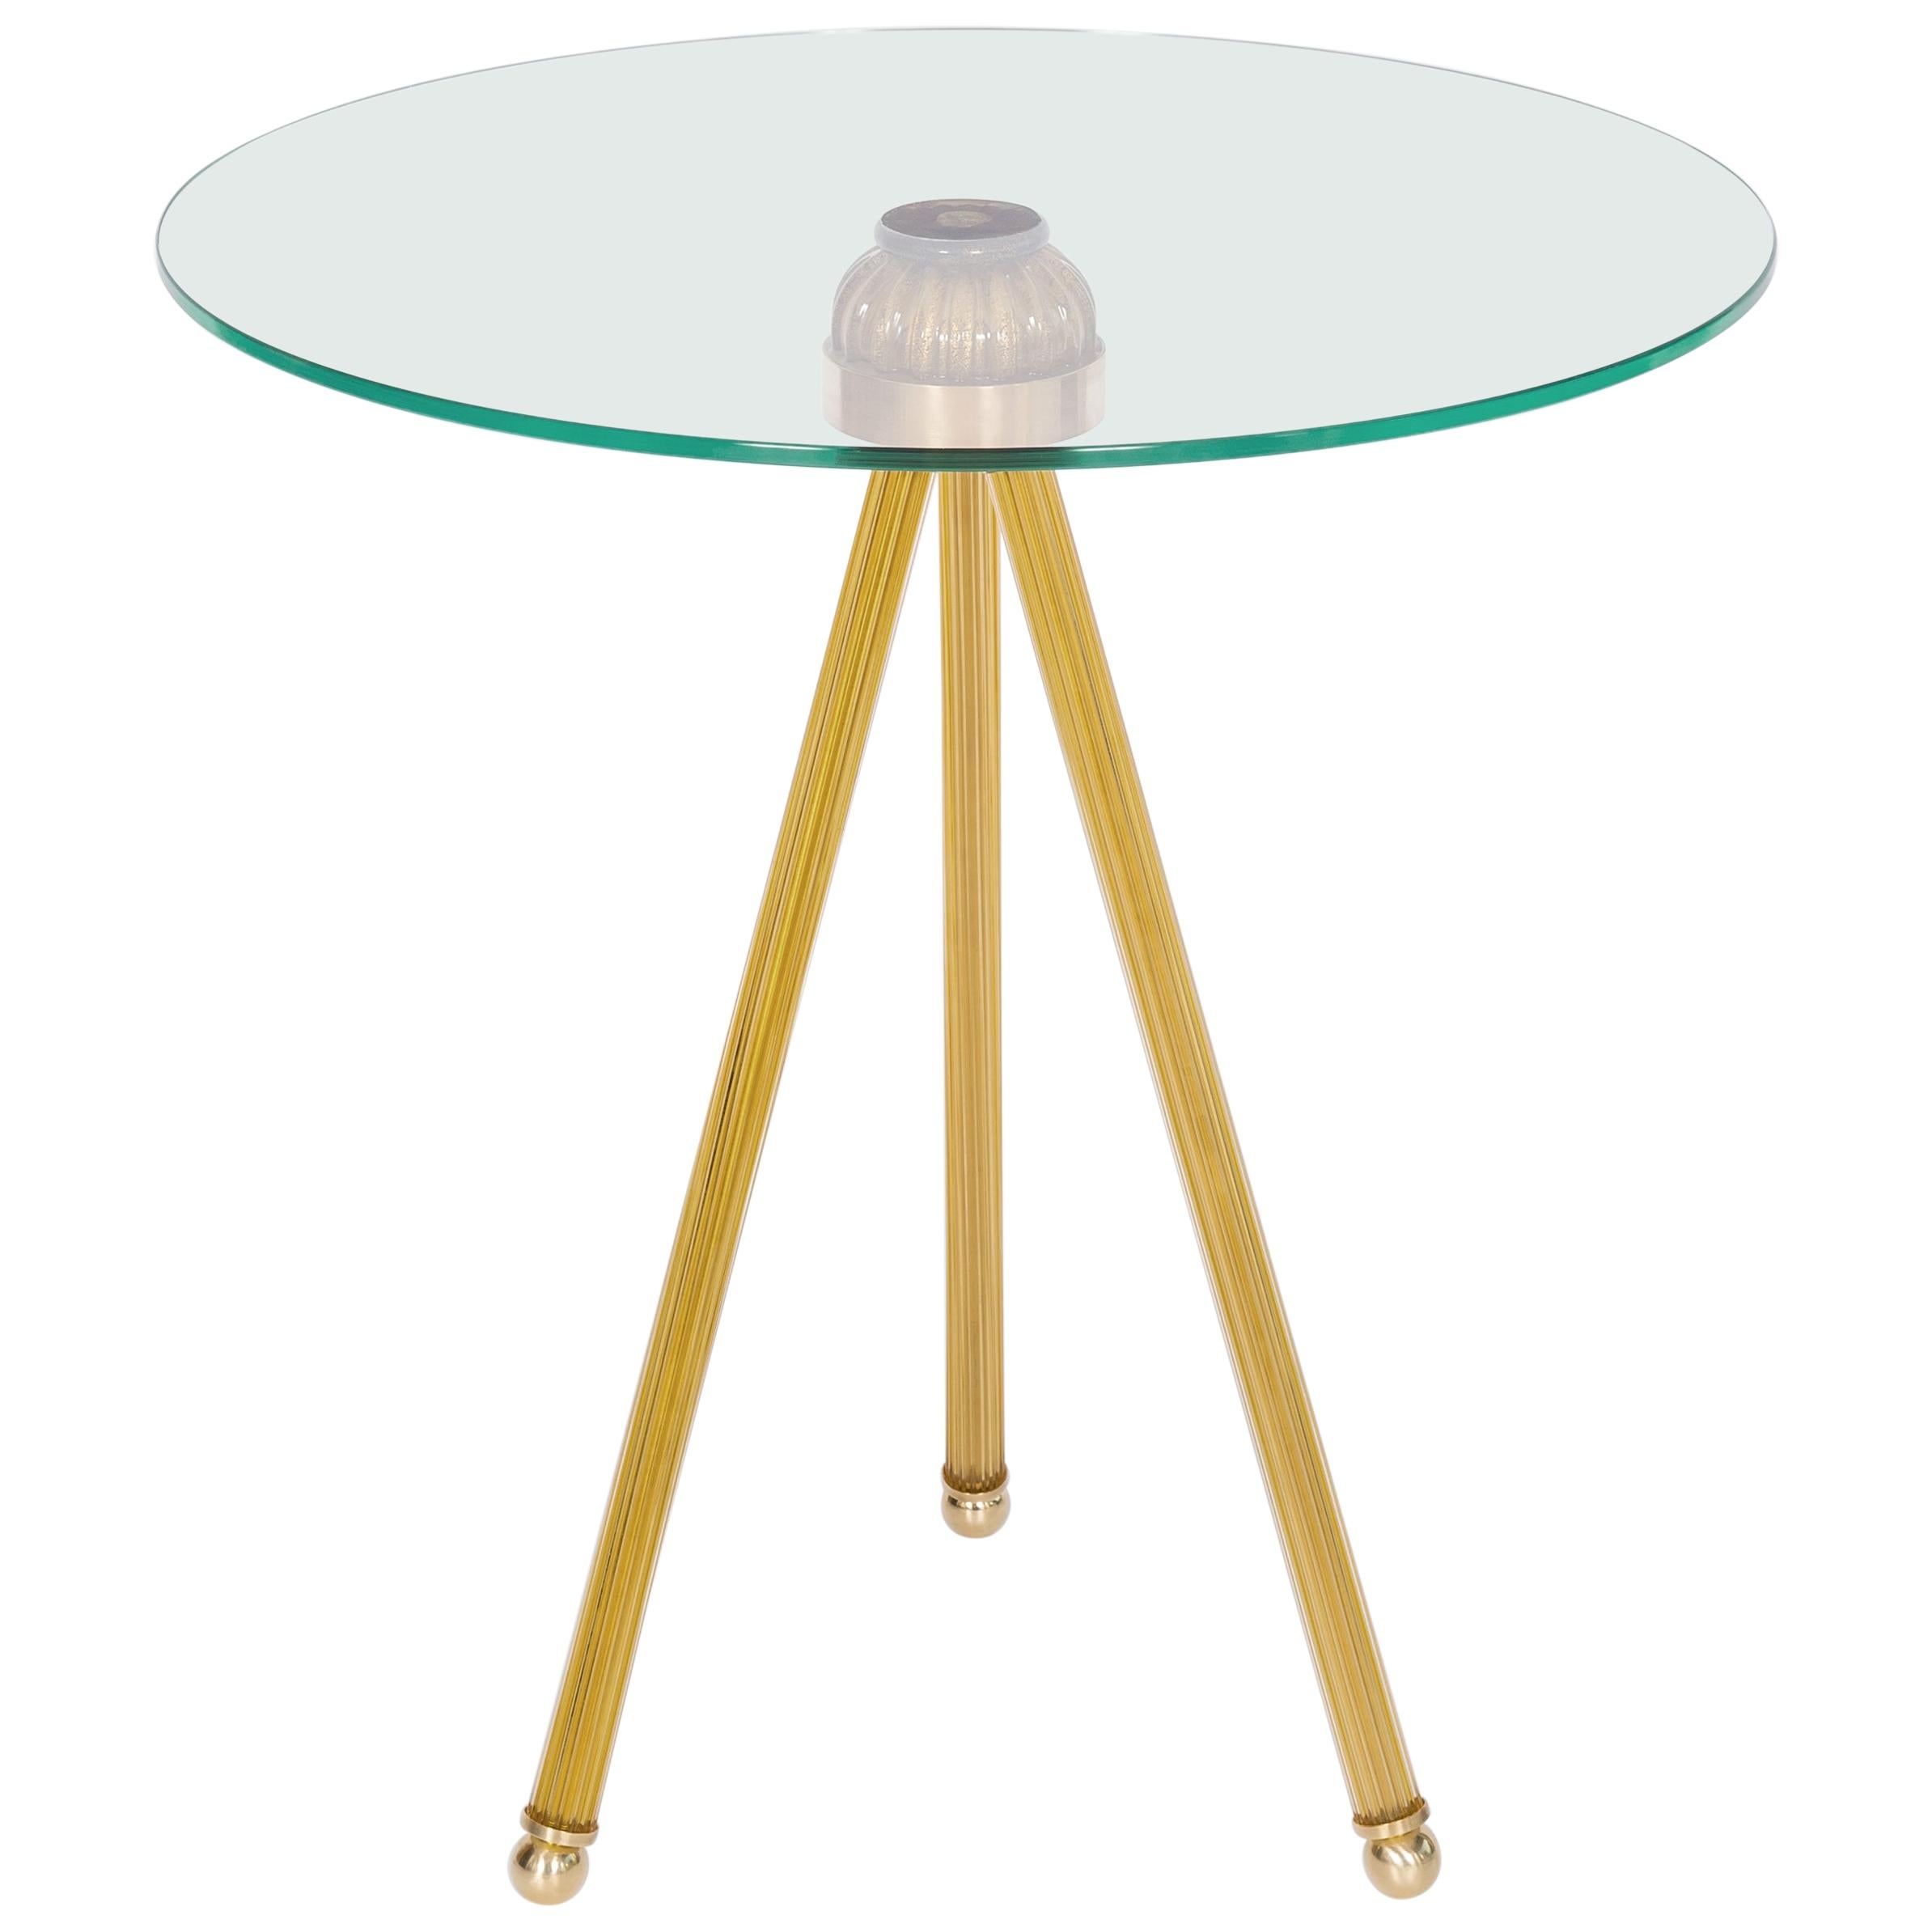 Cocktail table in Blown Murano Glass Amber Color and Brass finishes contemporary